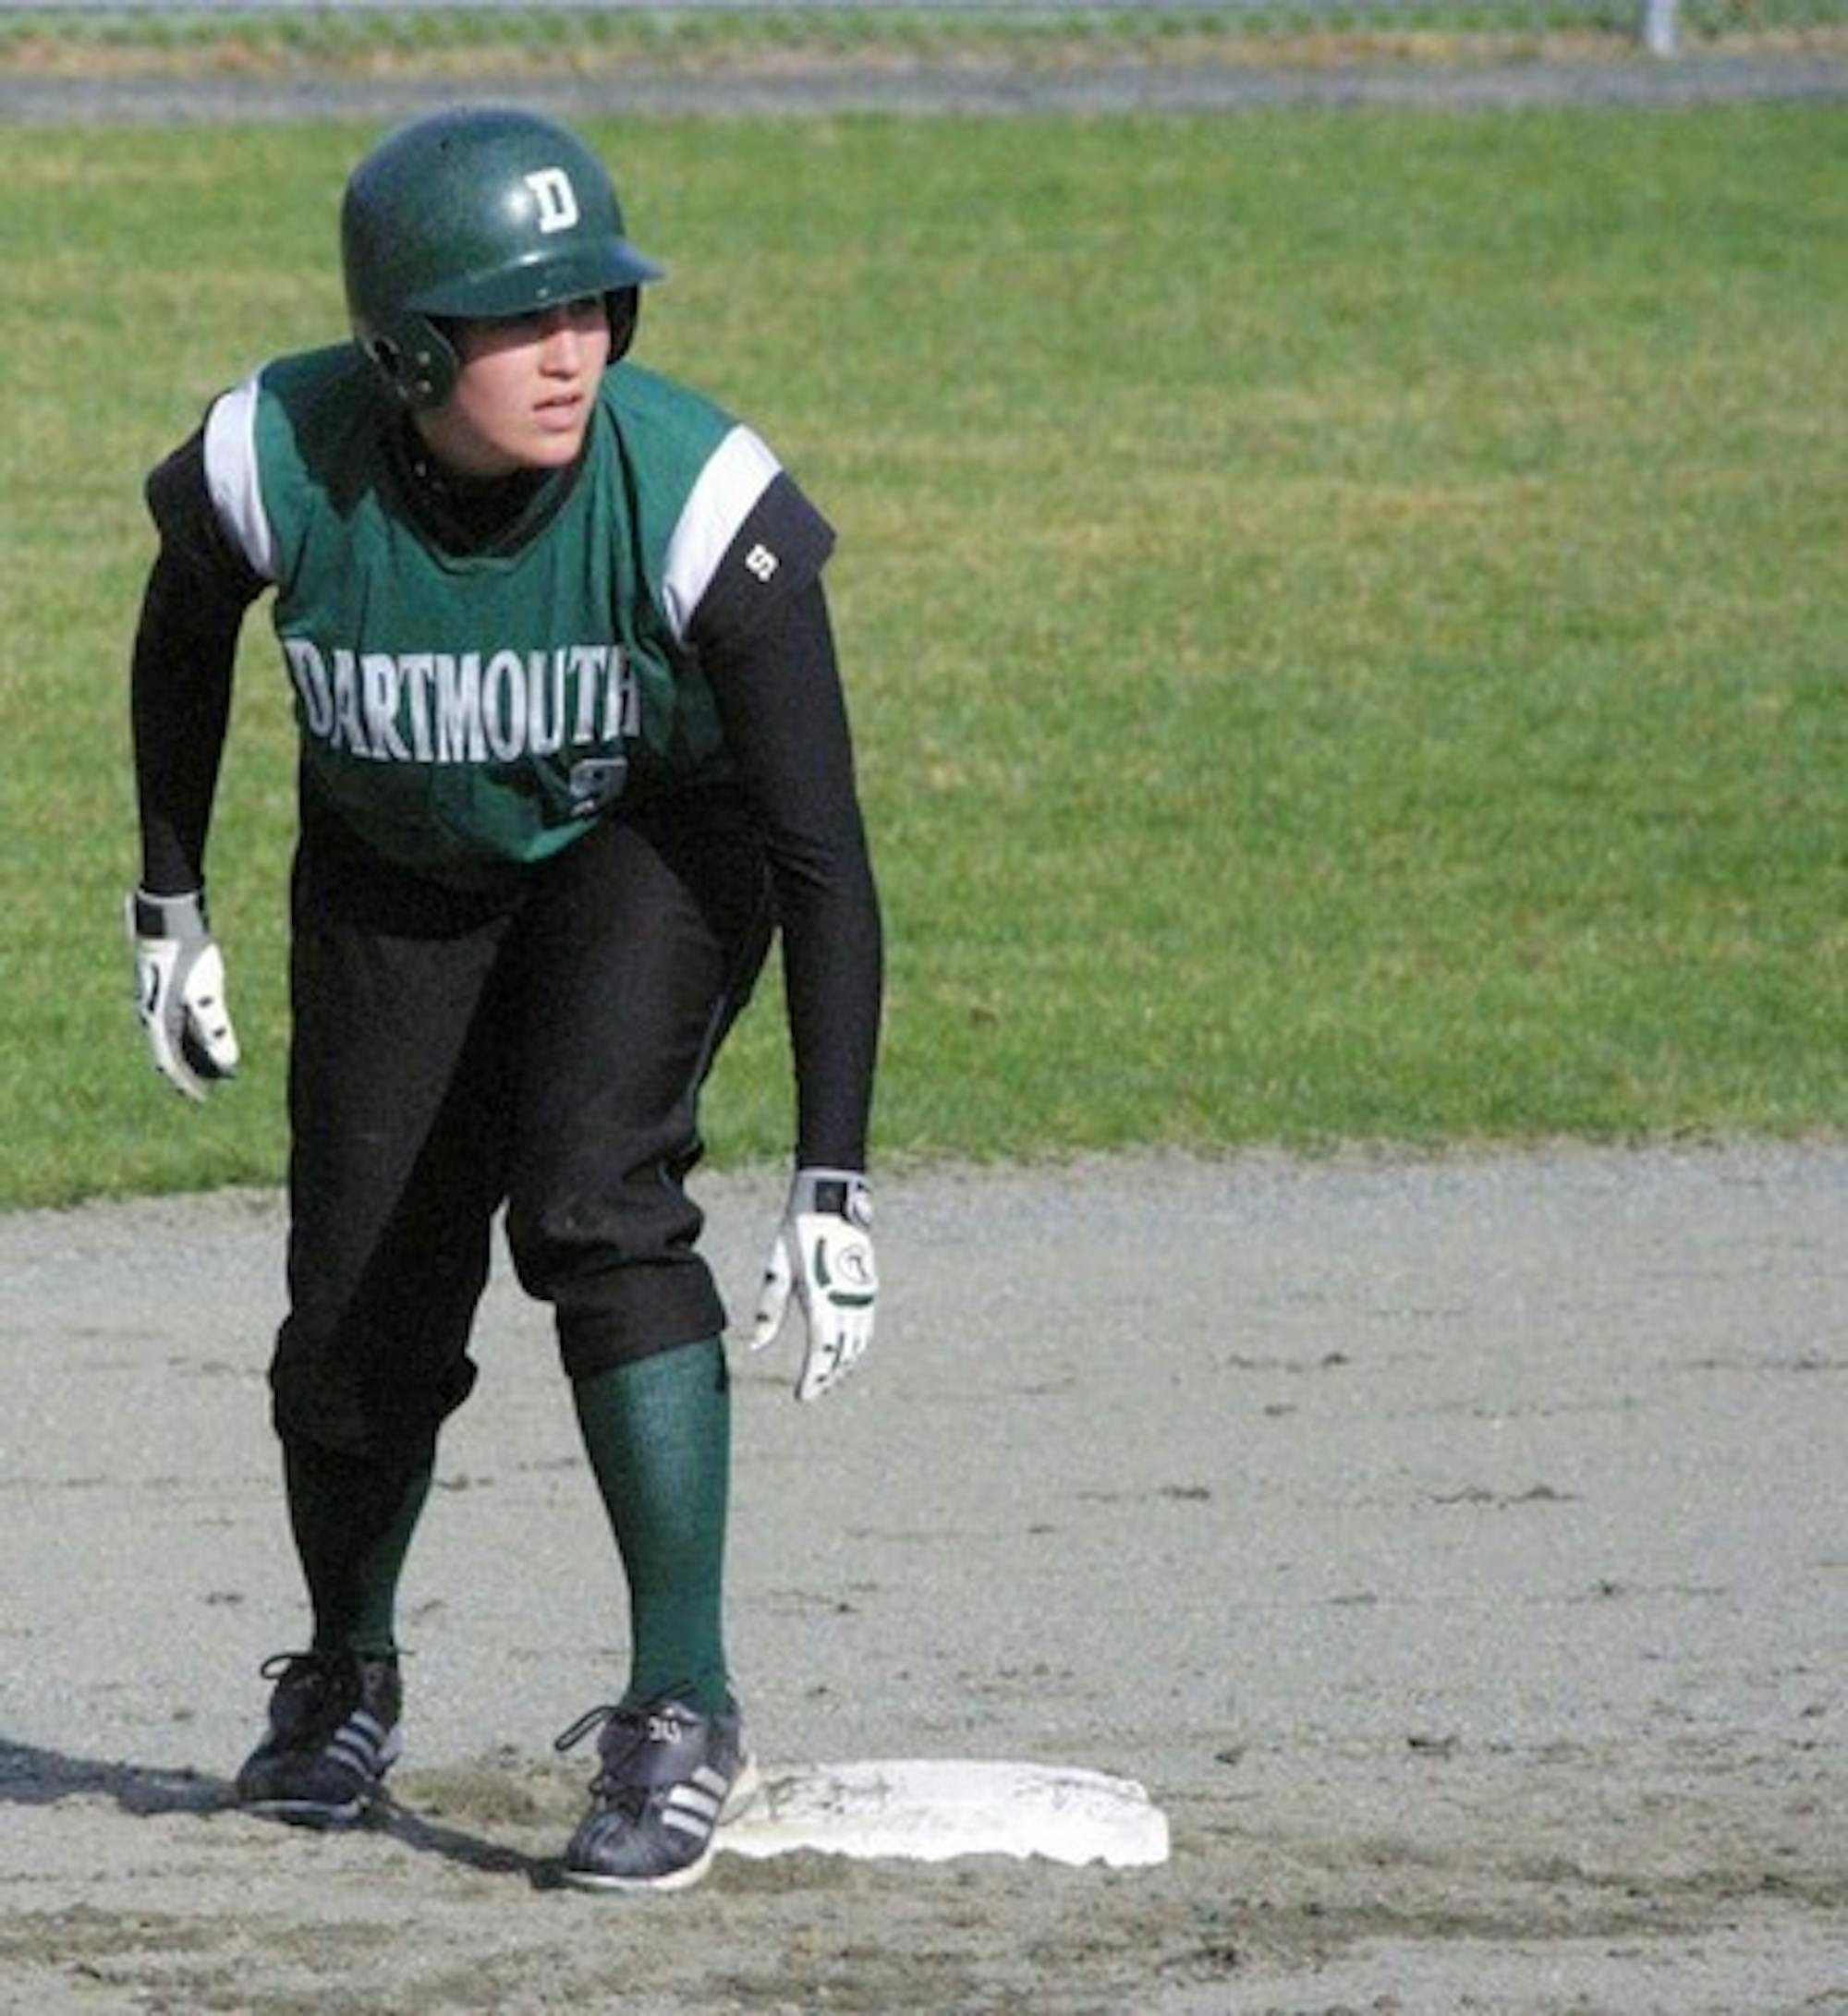 Dartmouth softball struggled to plate runners from scoring position in back-to-back losses to Fairfield Saturday.